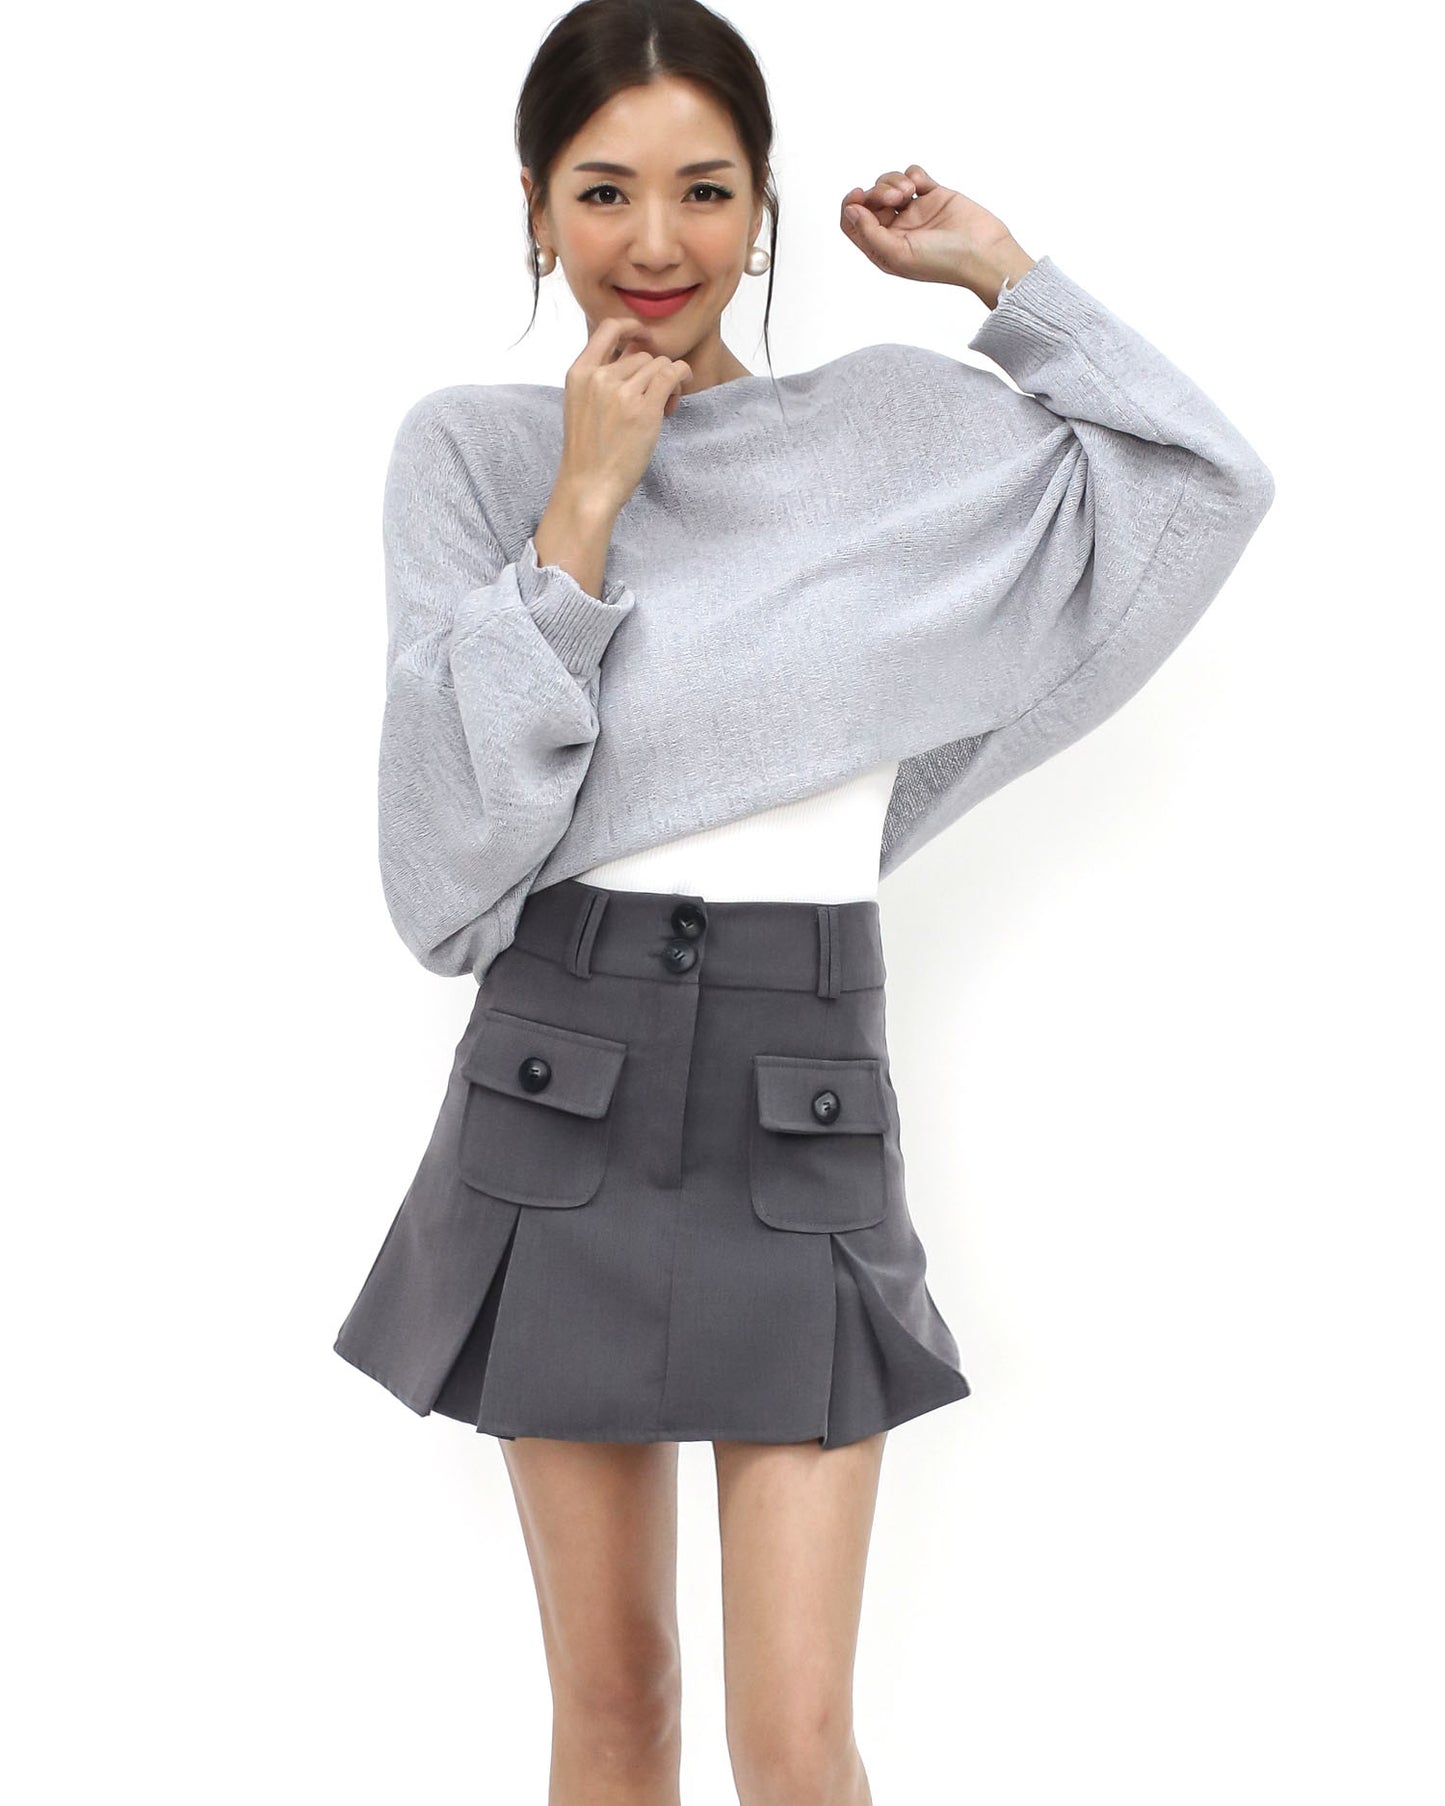 grey batwing fine knitted top